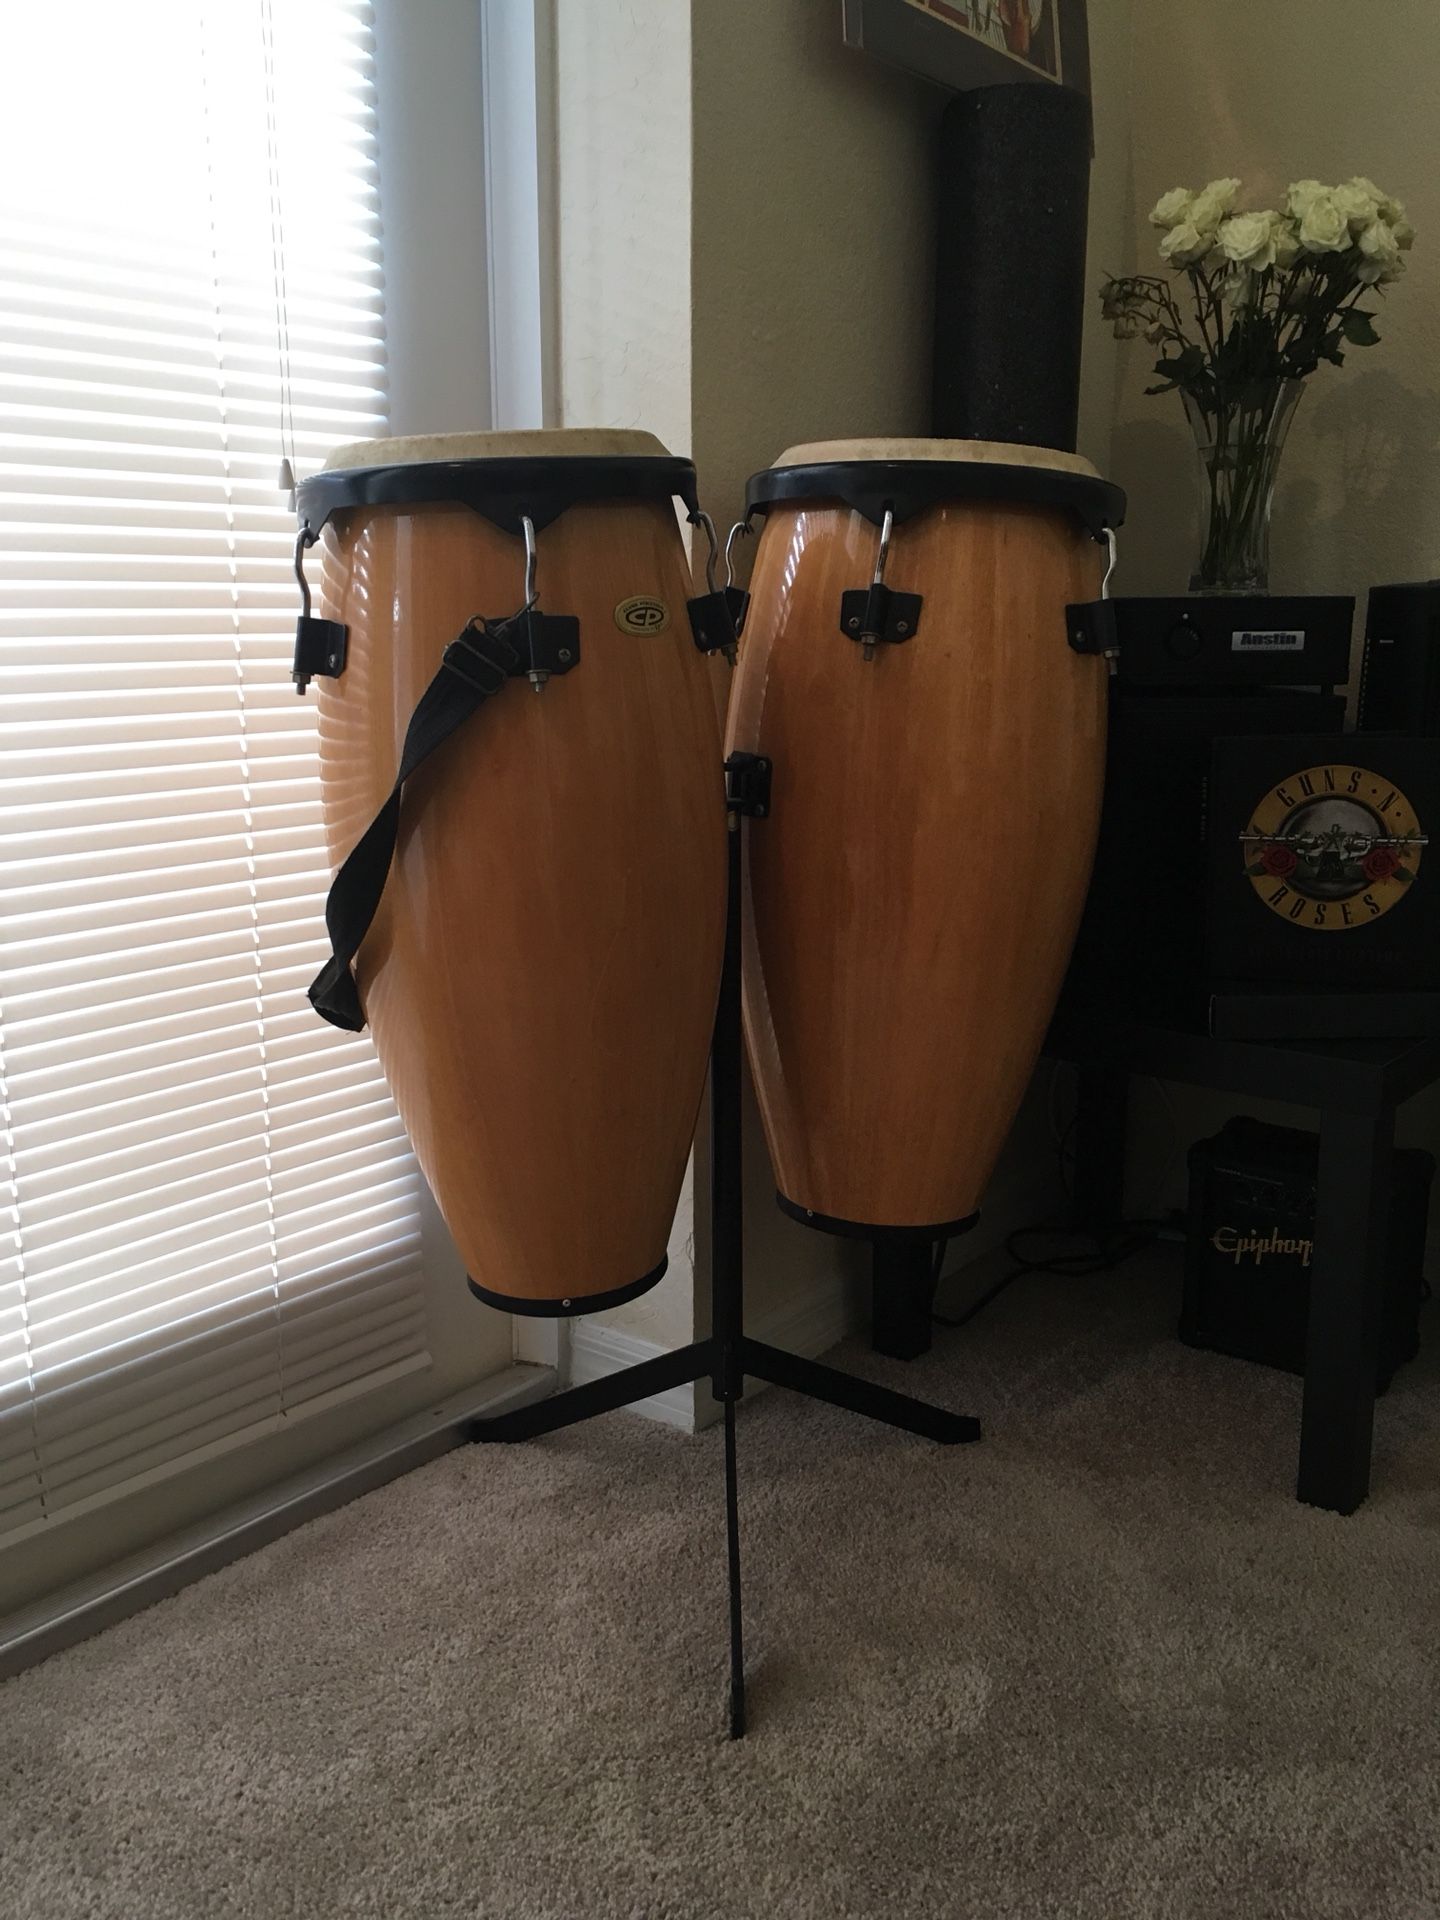 Cp congas W/Stand